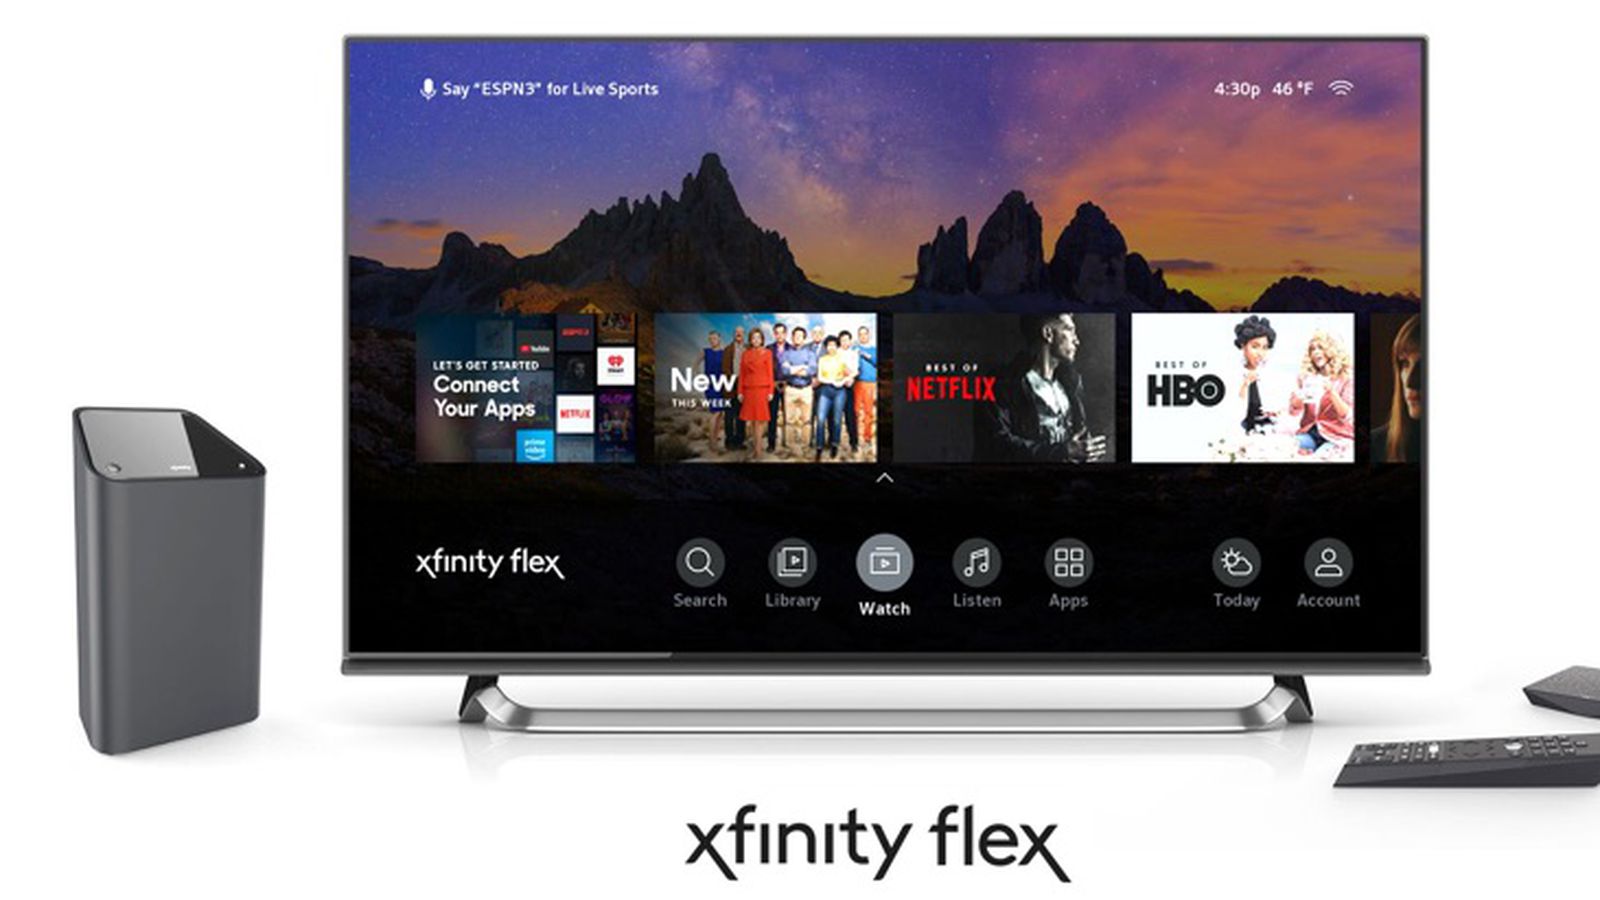 Comcast presently sells Xfinity Flex clients internet cable TV from YouTube